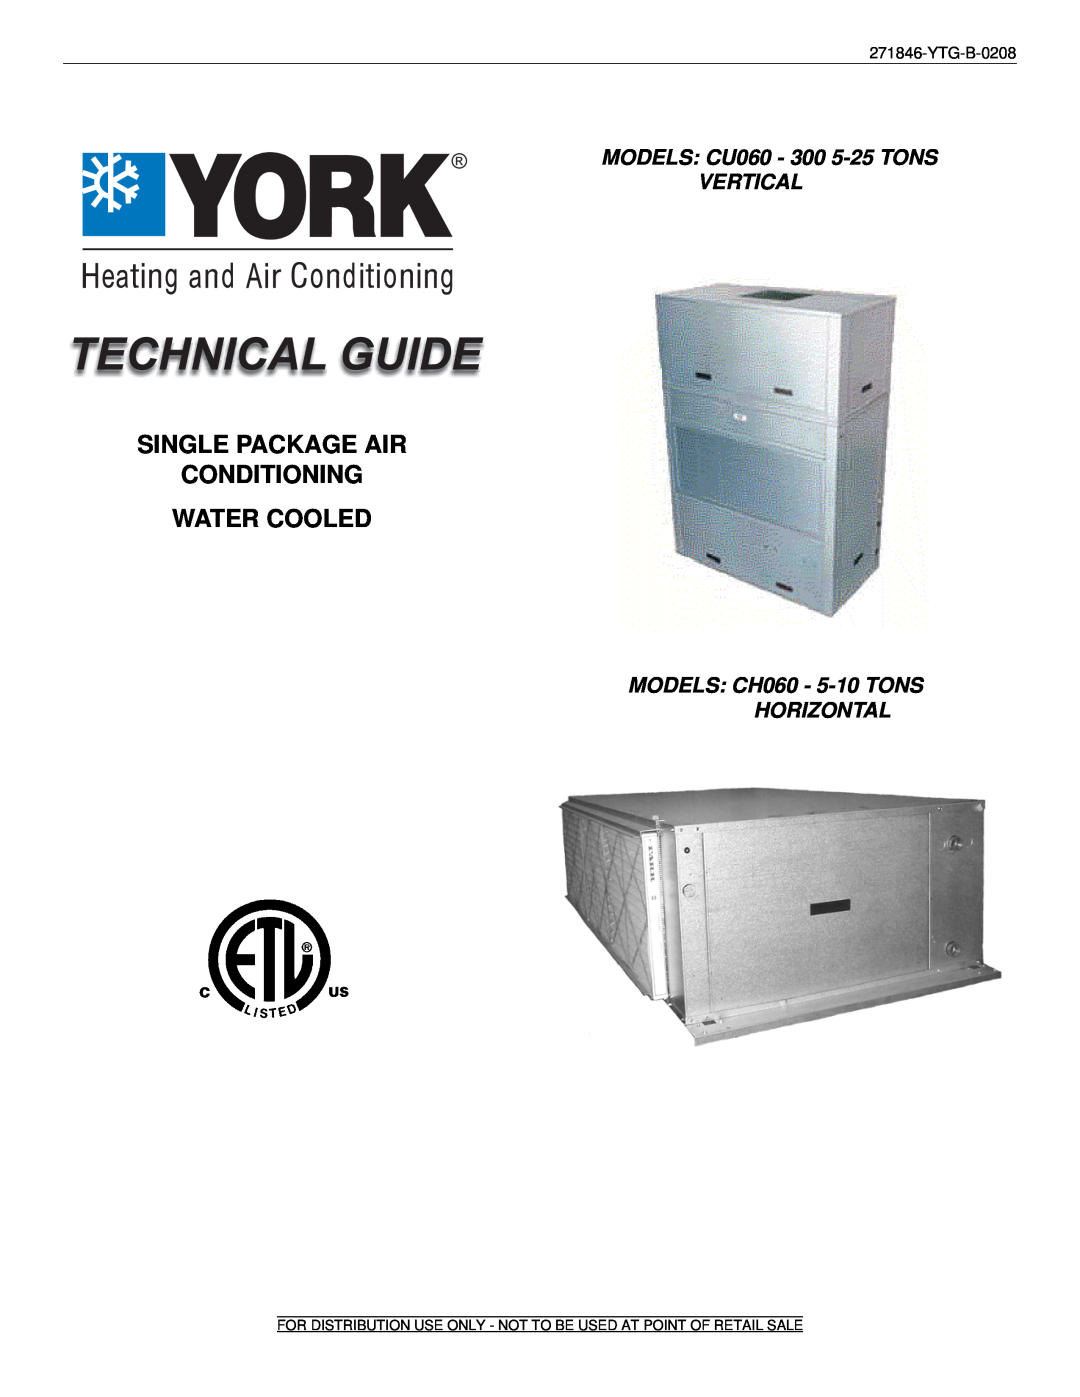 York manual Single Package Air Conditioning Water Cooled, MODELS CU060 - 300 5-25TONS VERTICAL 